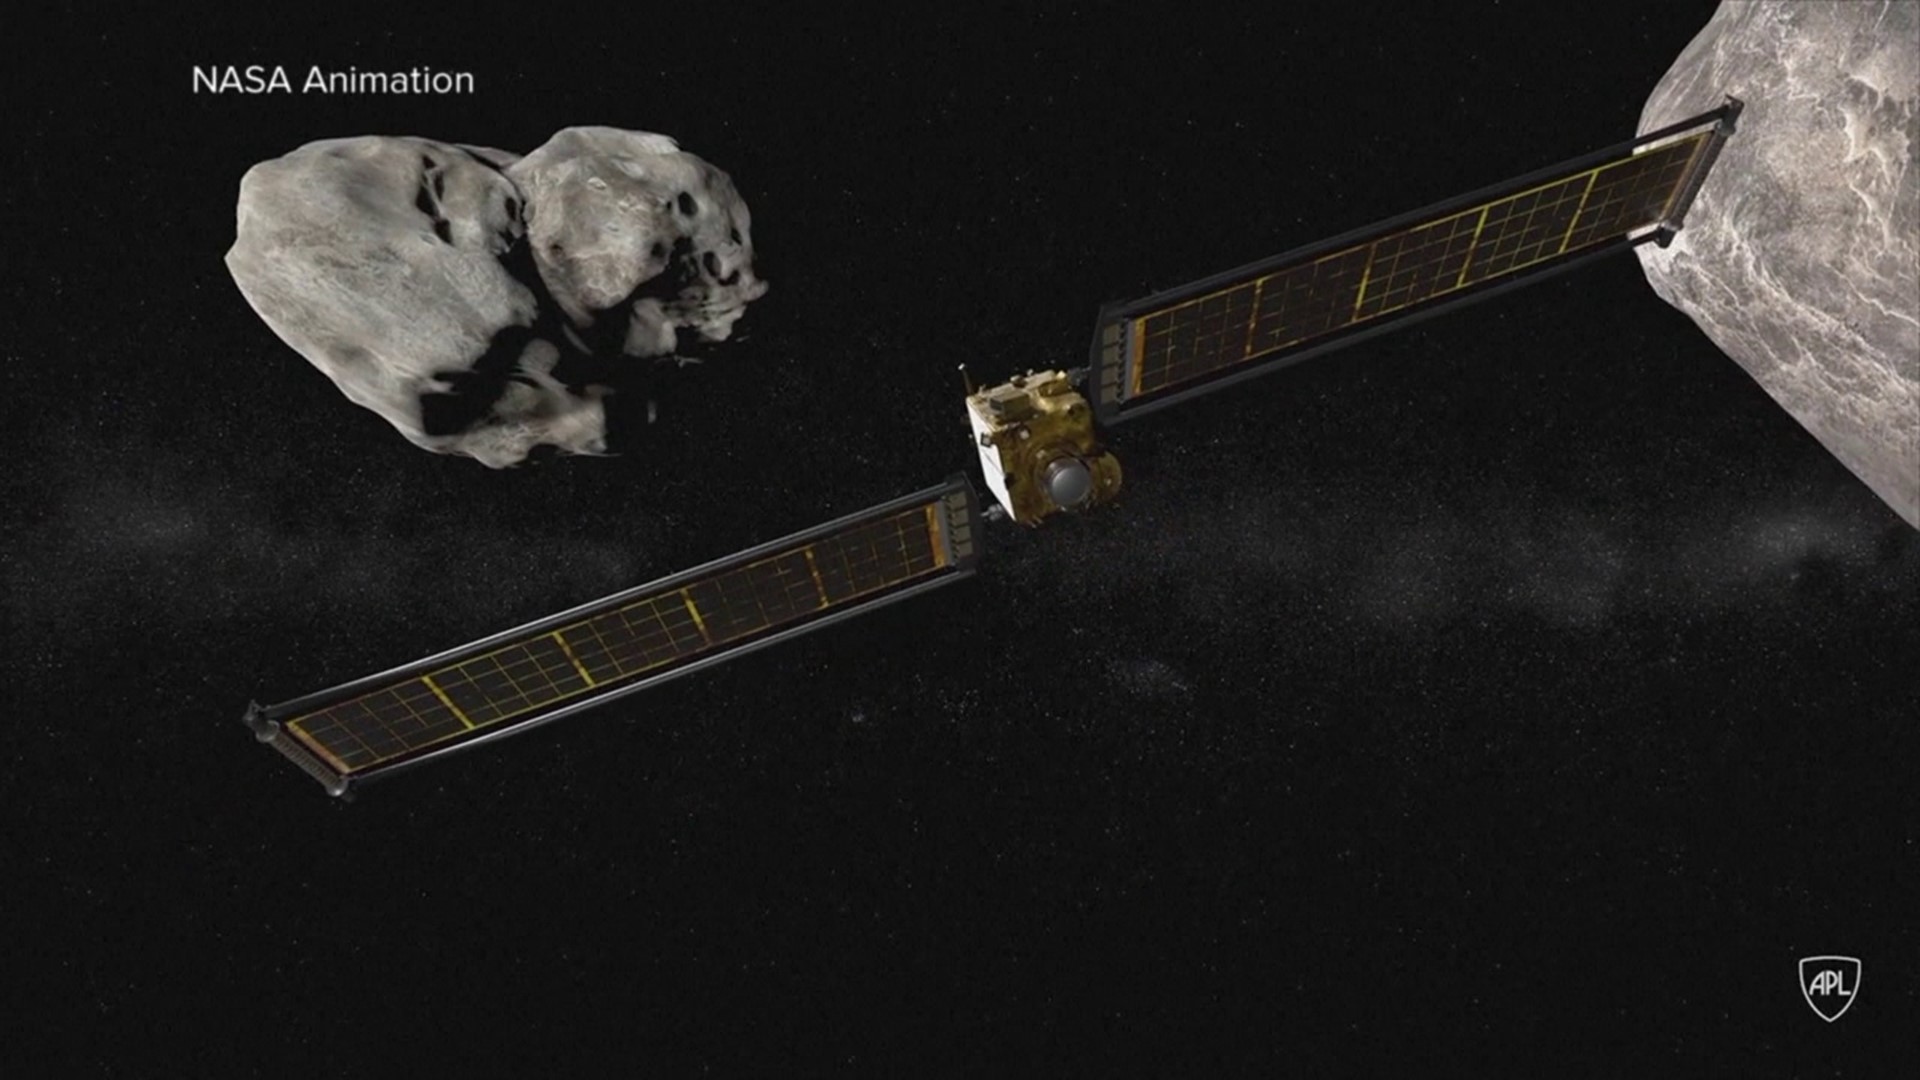 While Artemis is remaining on the ground for now,  NASA is launching another spacecraft at an asteroid.